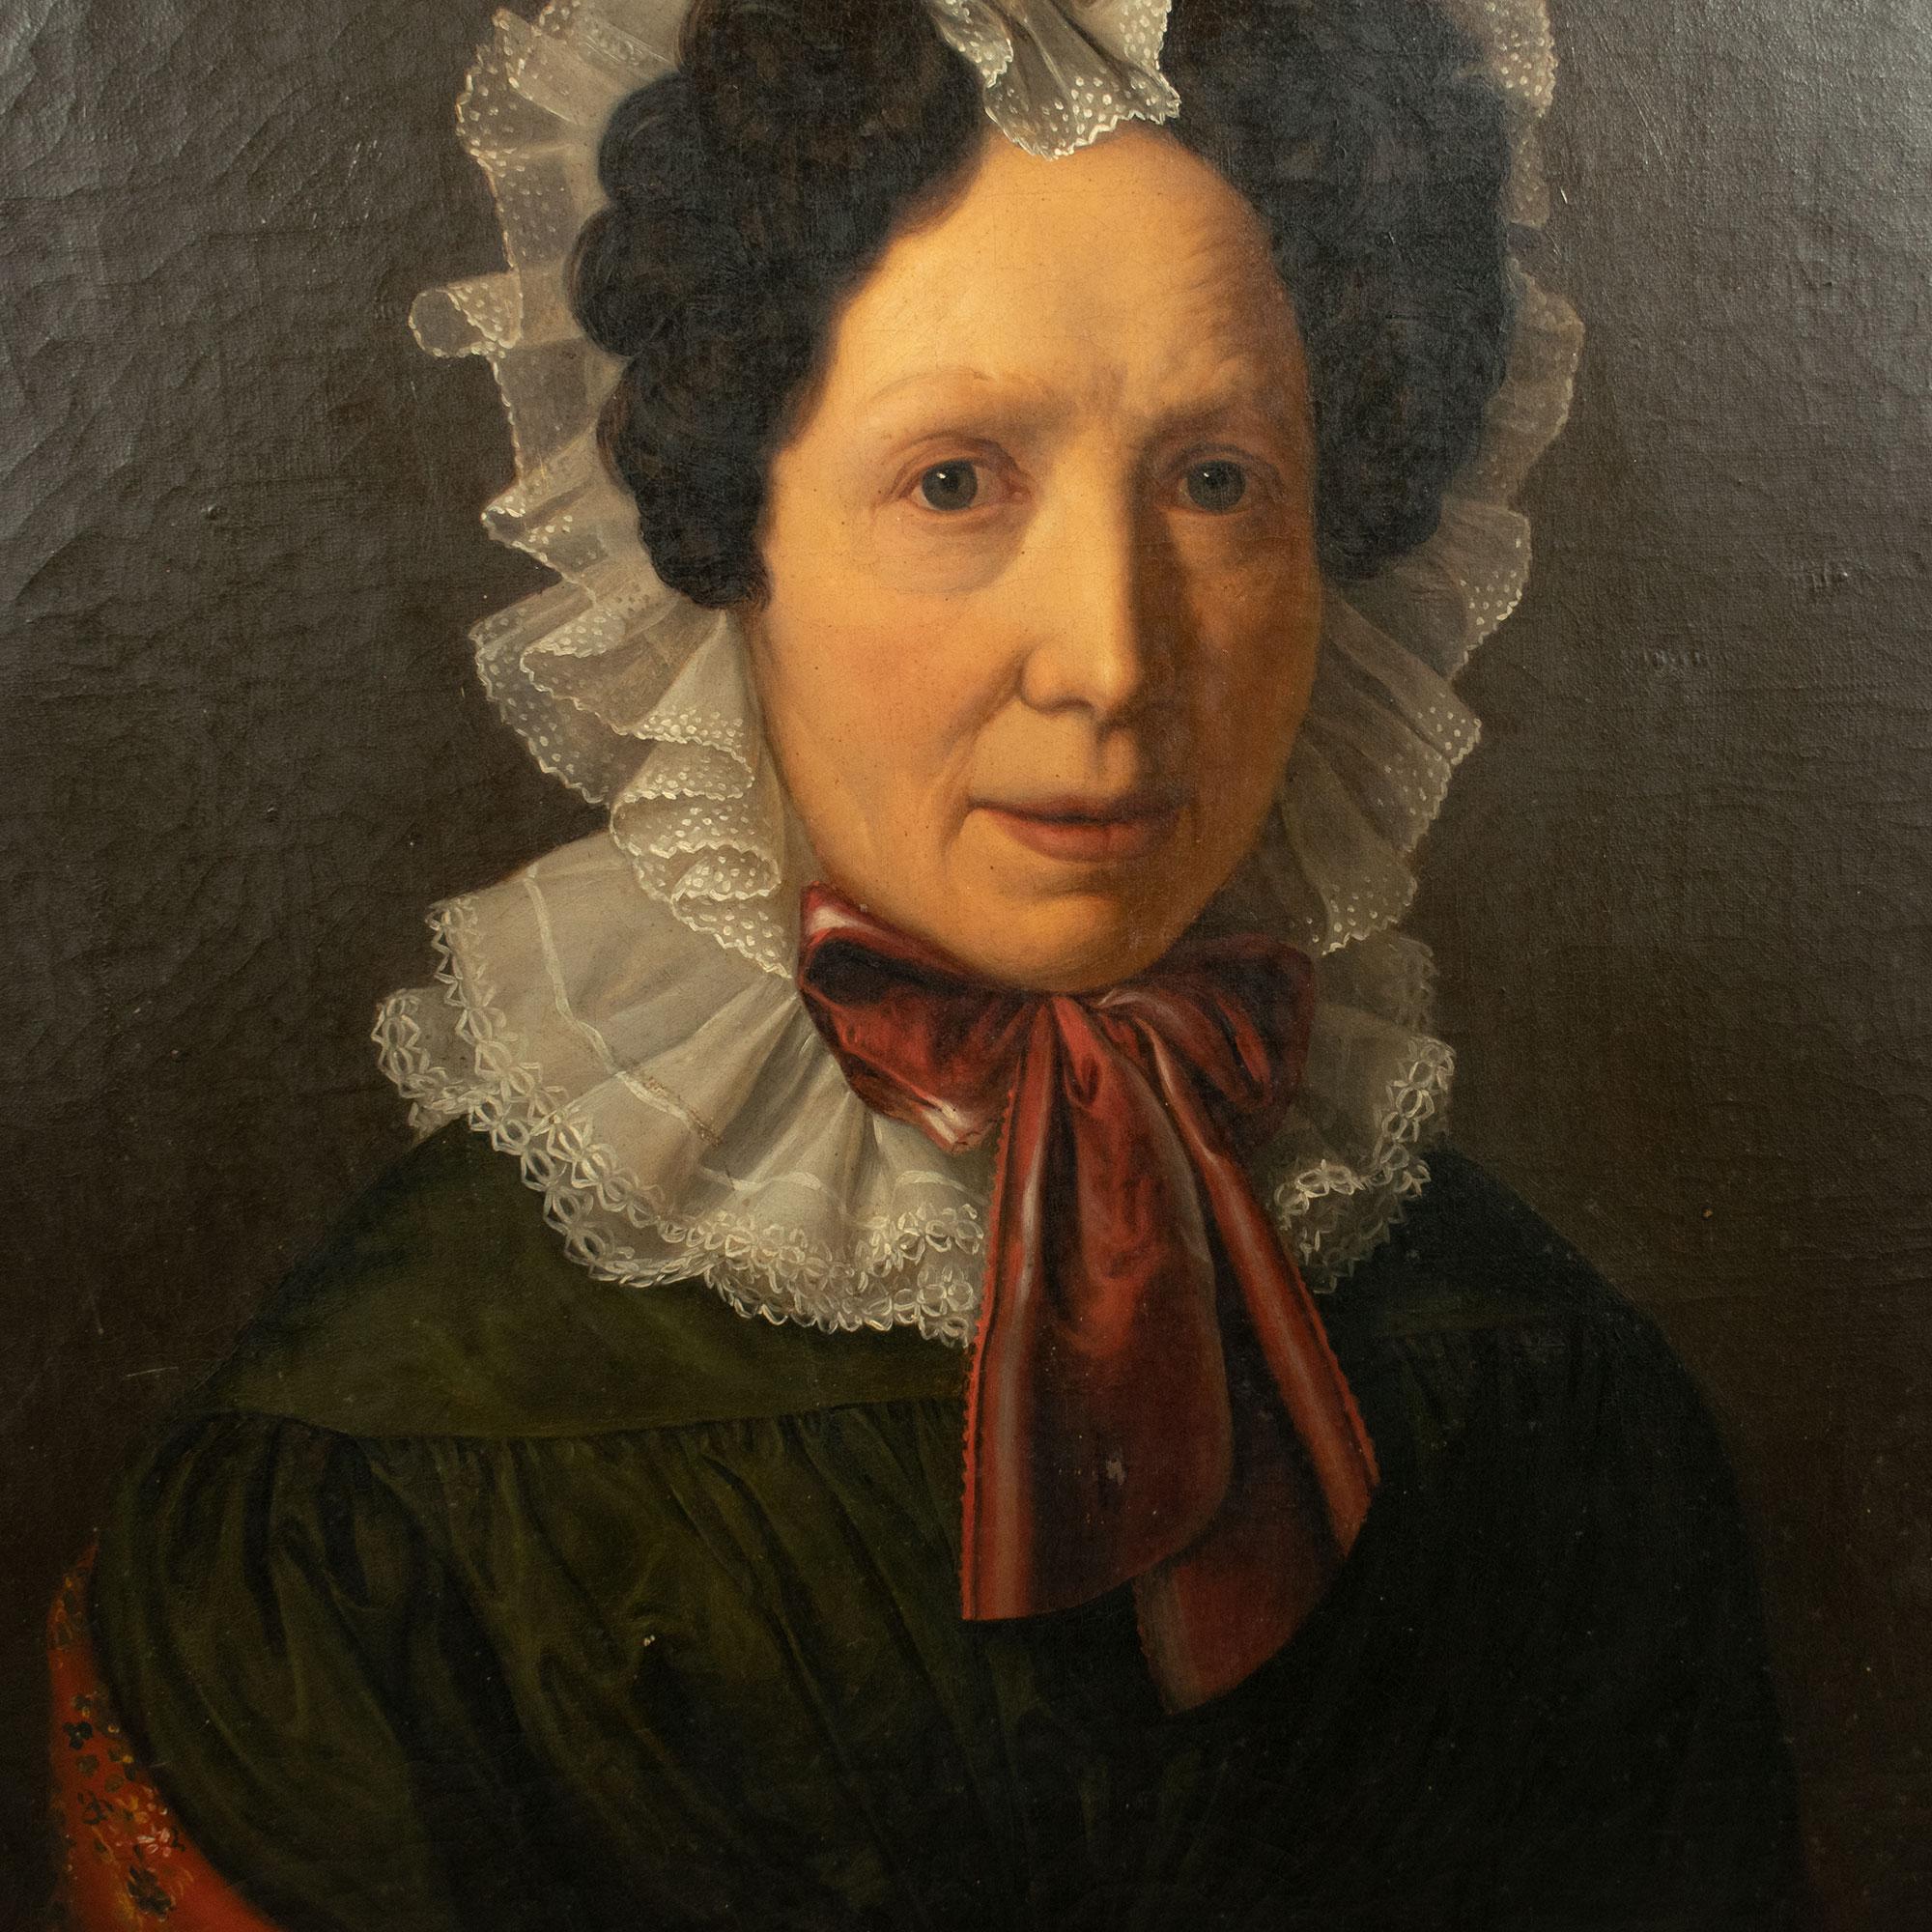 English School (early 19th Century) Portrait of a Lady, Oil on Canvas, circa 1820.

Portrait of a lady in a lace bonnet tied with red ribbons, wearing a green dress with a floral stole in matching red tones.

The painting is mounted in its original